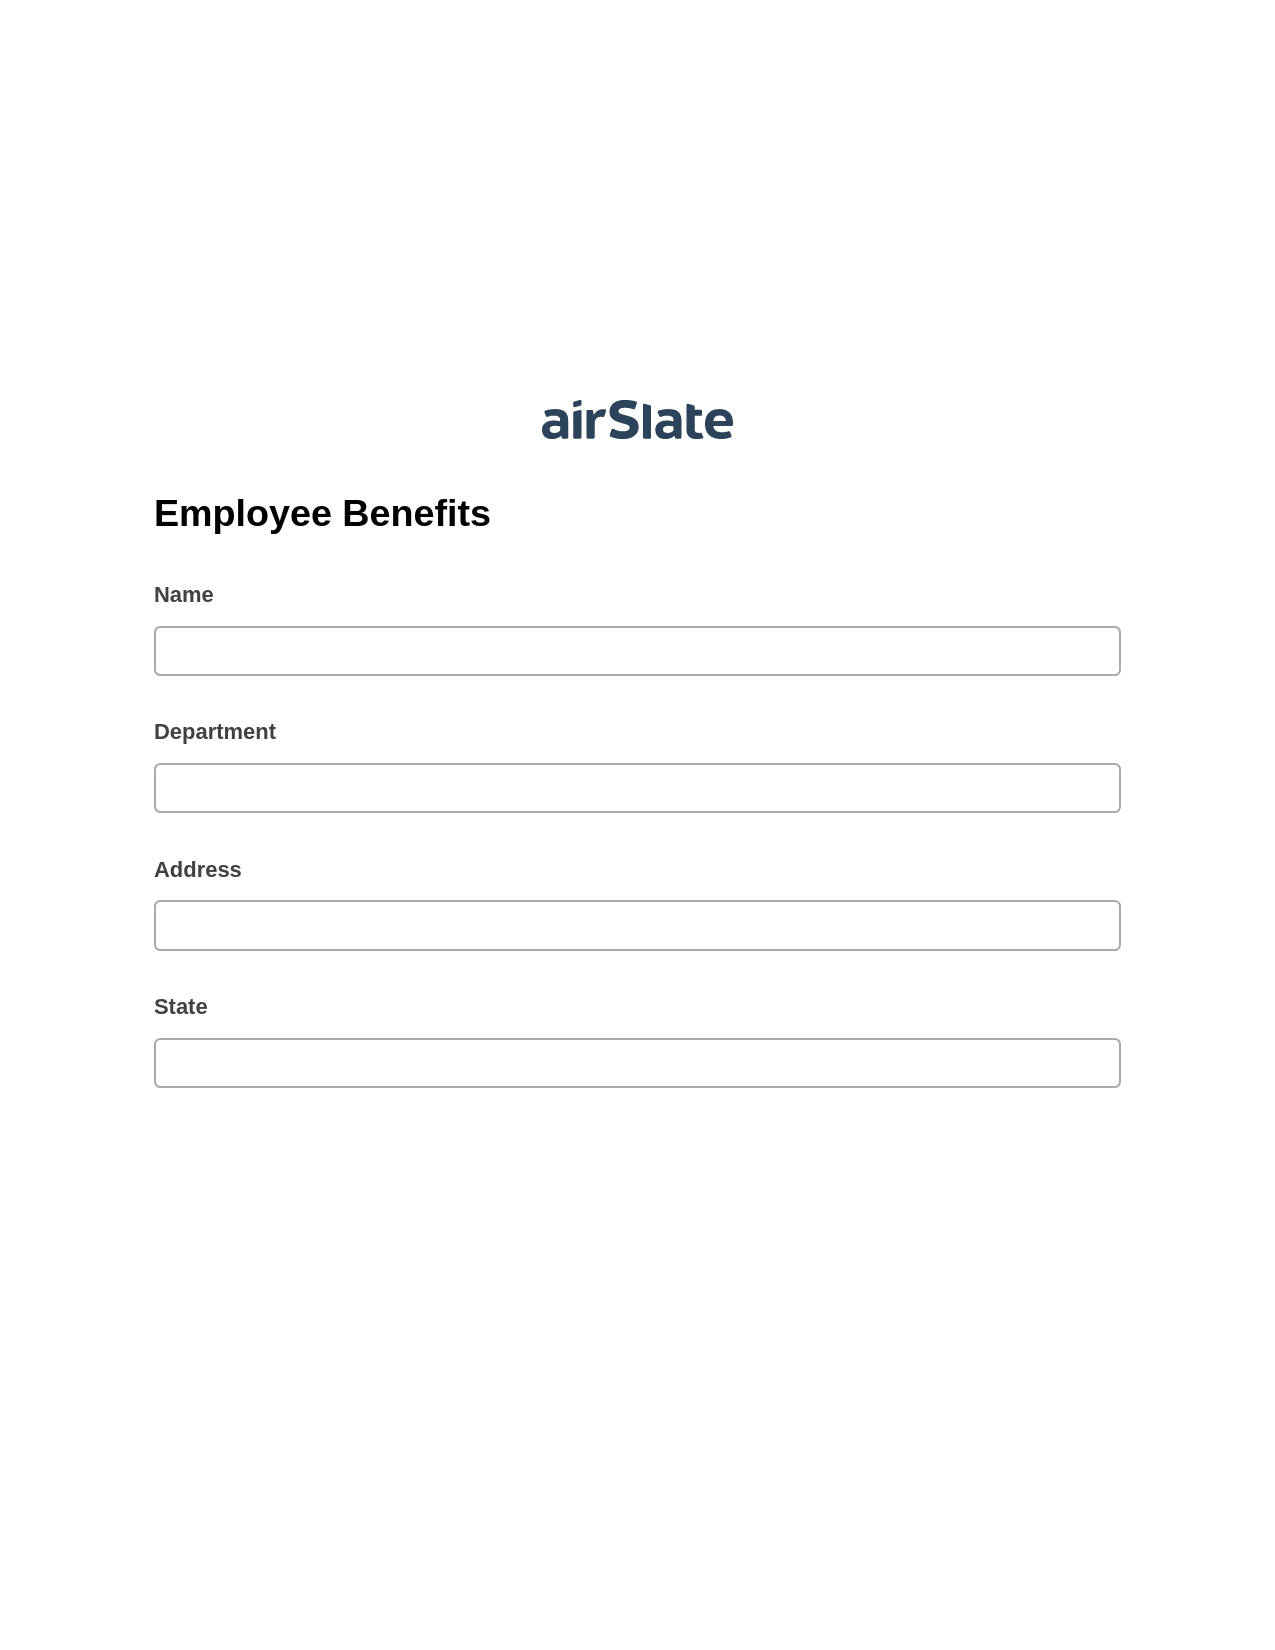 Multirole Employee Benefits Pre-fill Dropdown from Airtable, Audit Trail Bot, Export to Excel 365 Bot